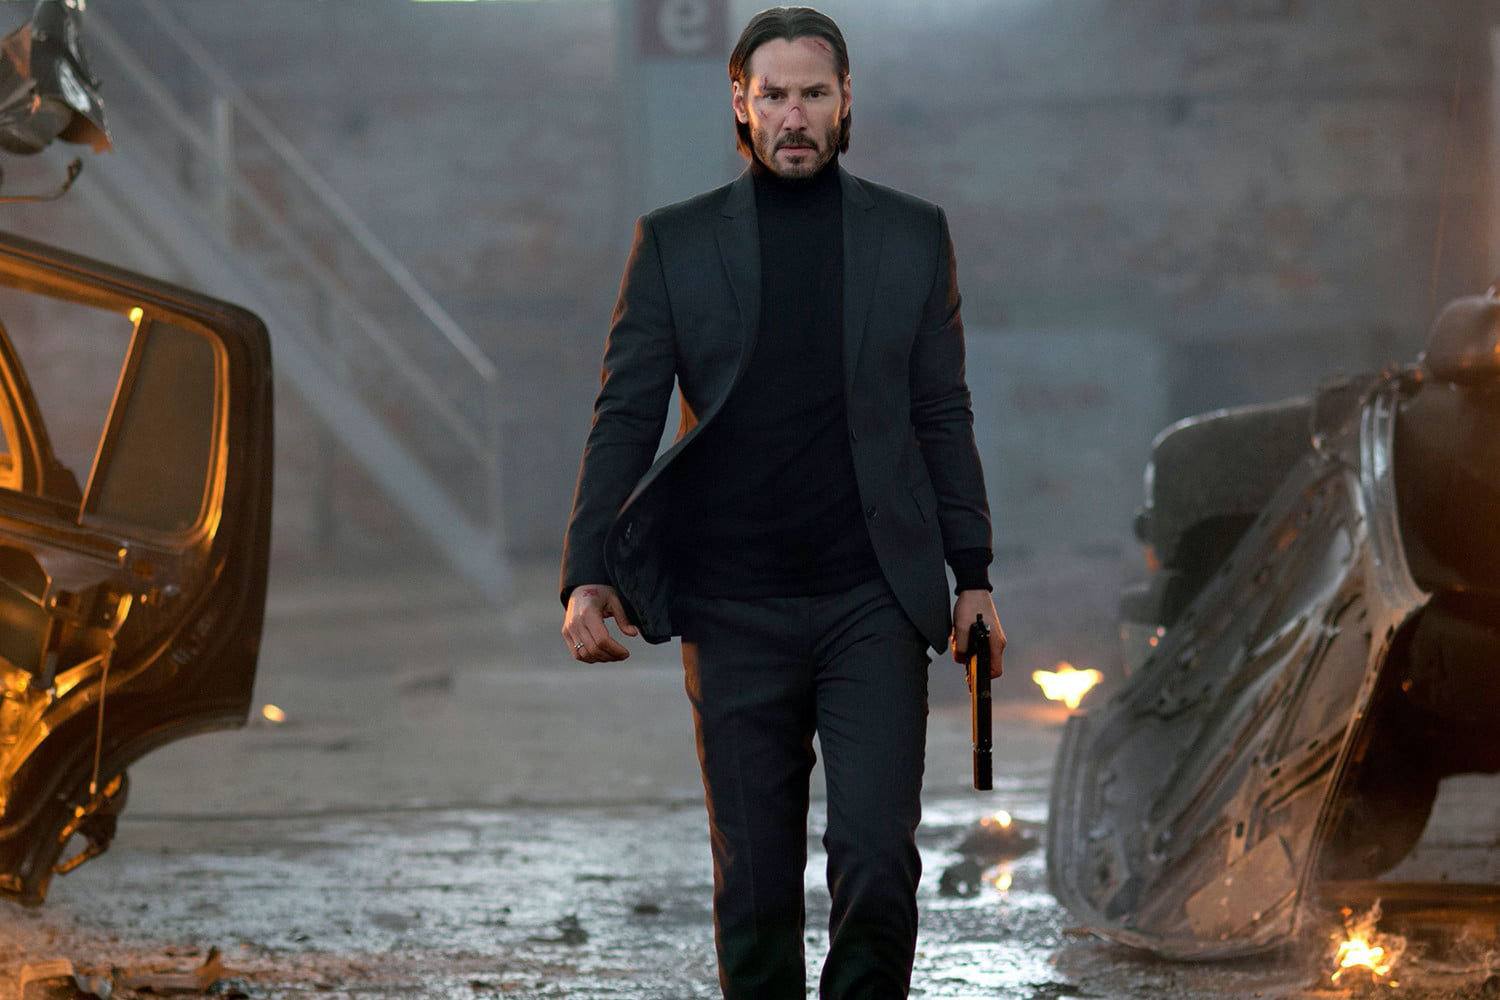 What The John Wick Suit Teaches Us About Tailoring